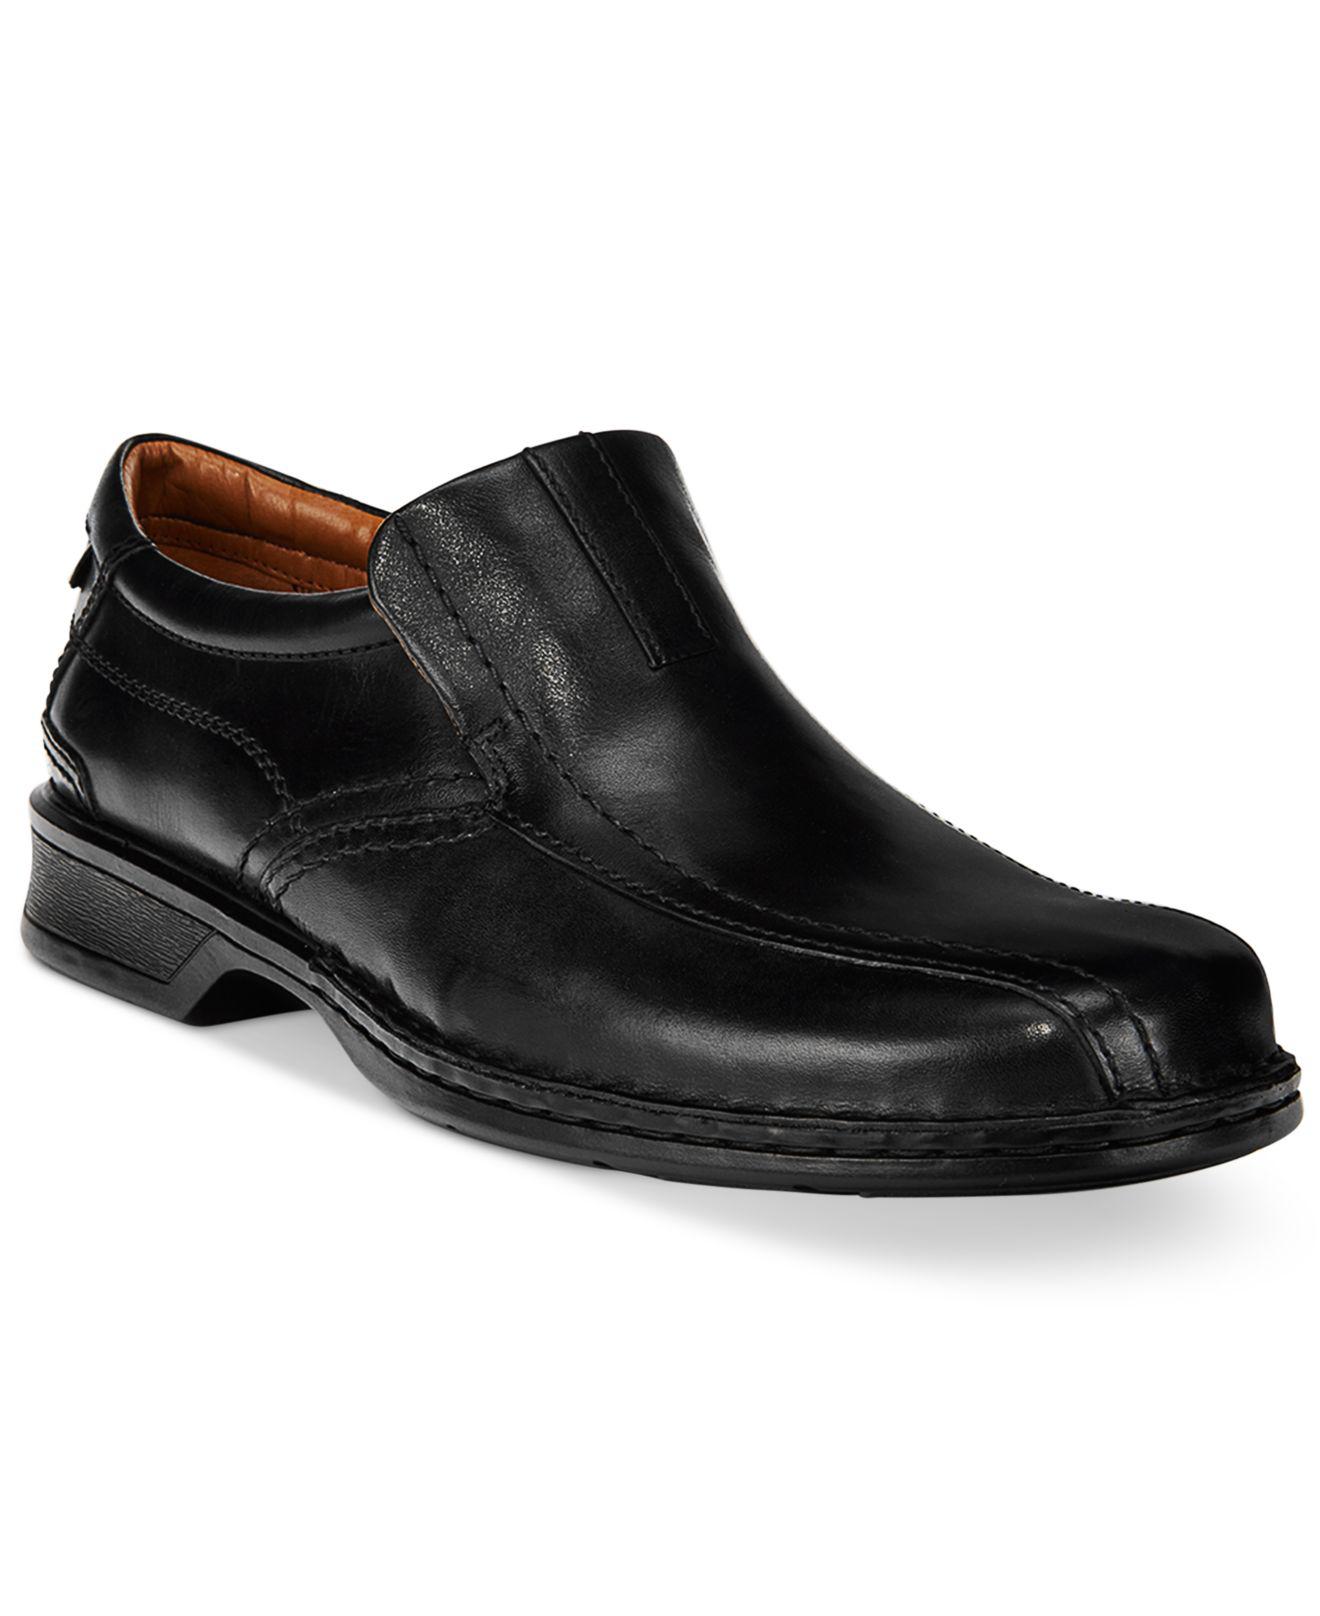 Clarks Leather Escalade Step Loafer in Black Leather (Black) for Men - Lyst